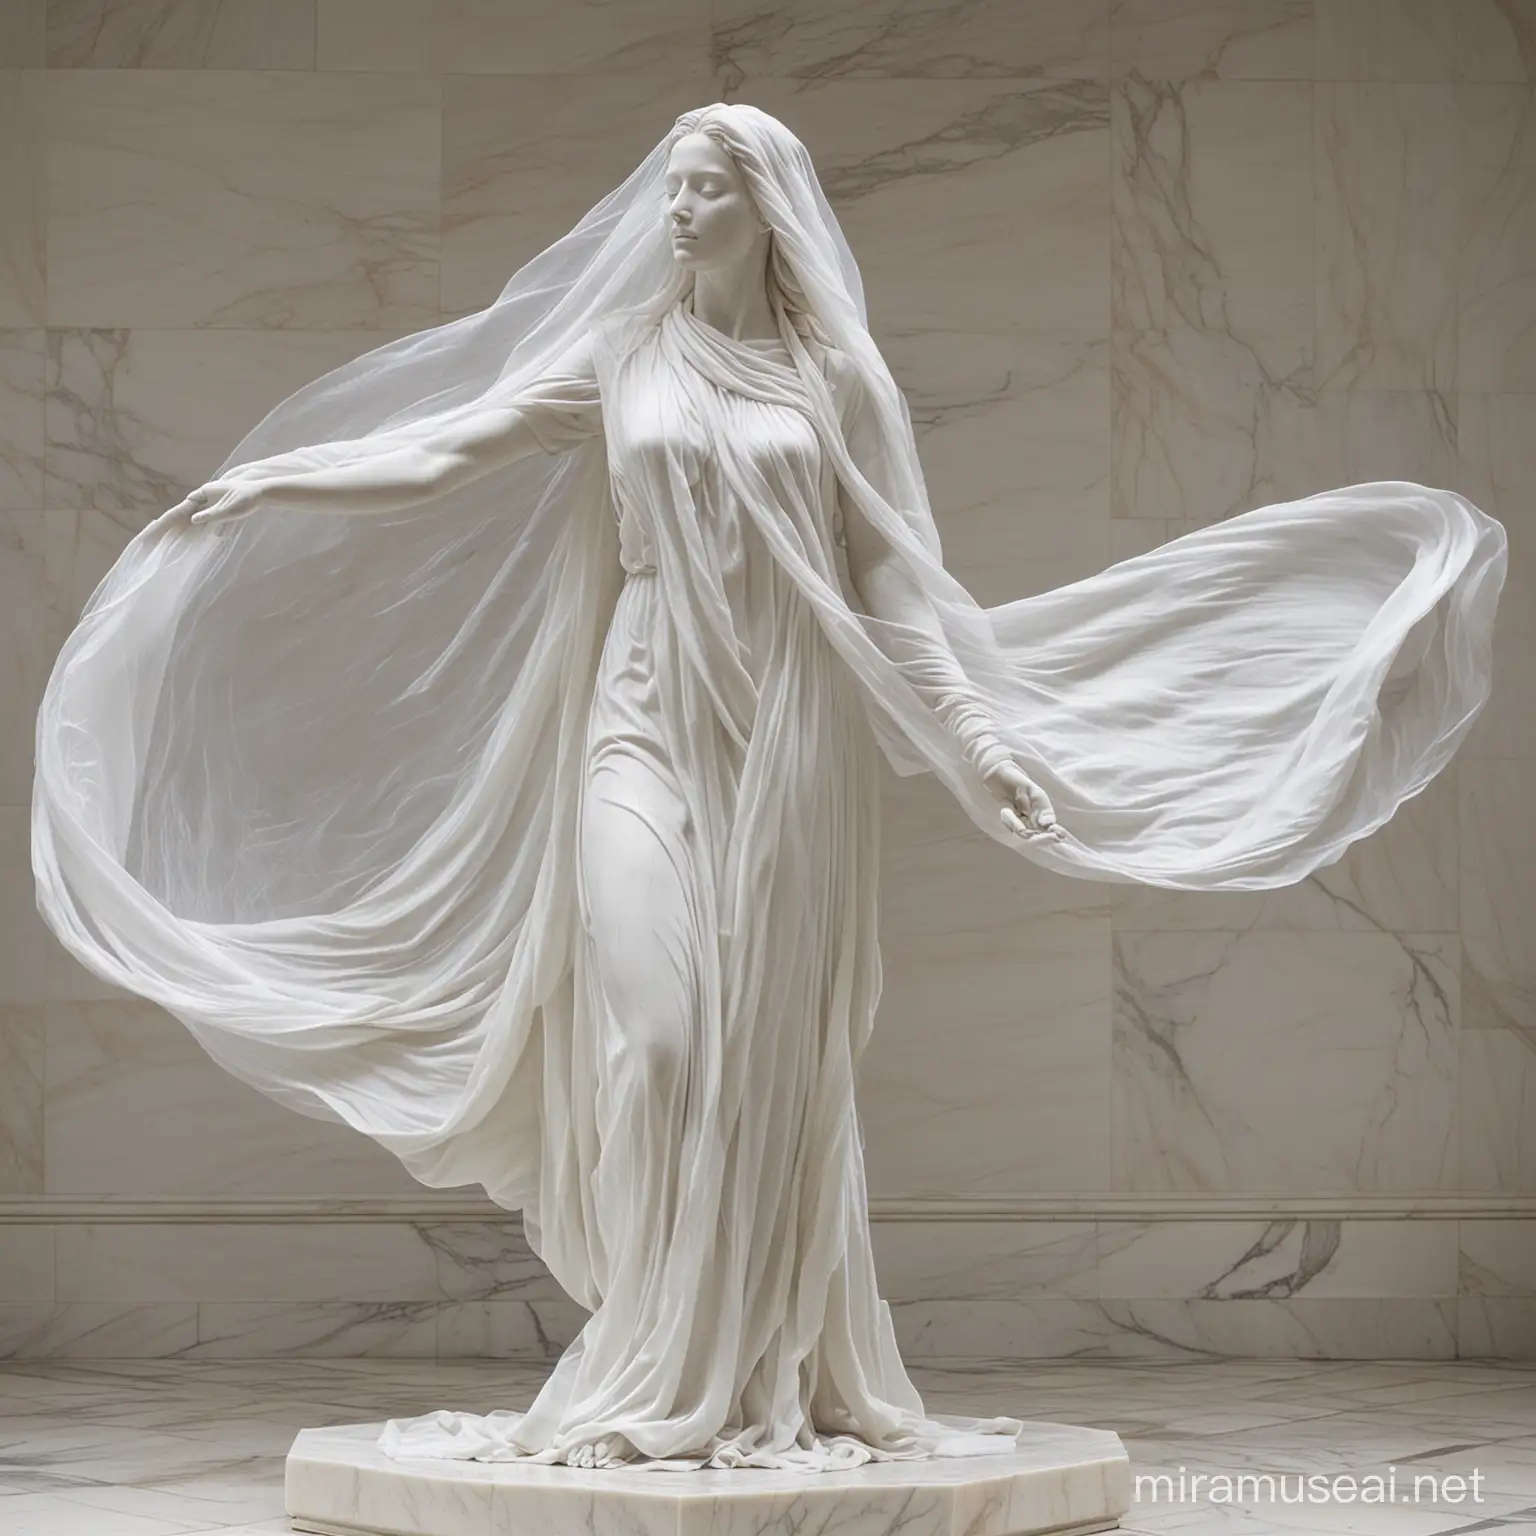 A white marble sculpture of a woman in the wind, wind blowing from front, fullbody covered with a white veil, the woman is looking in front